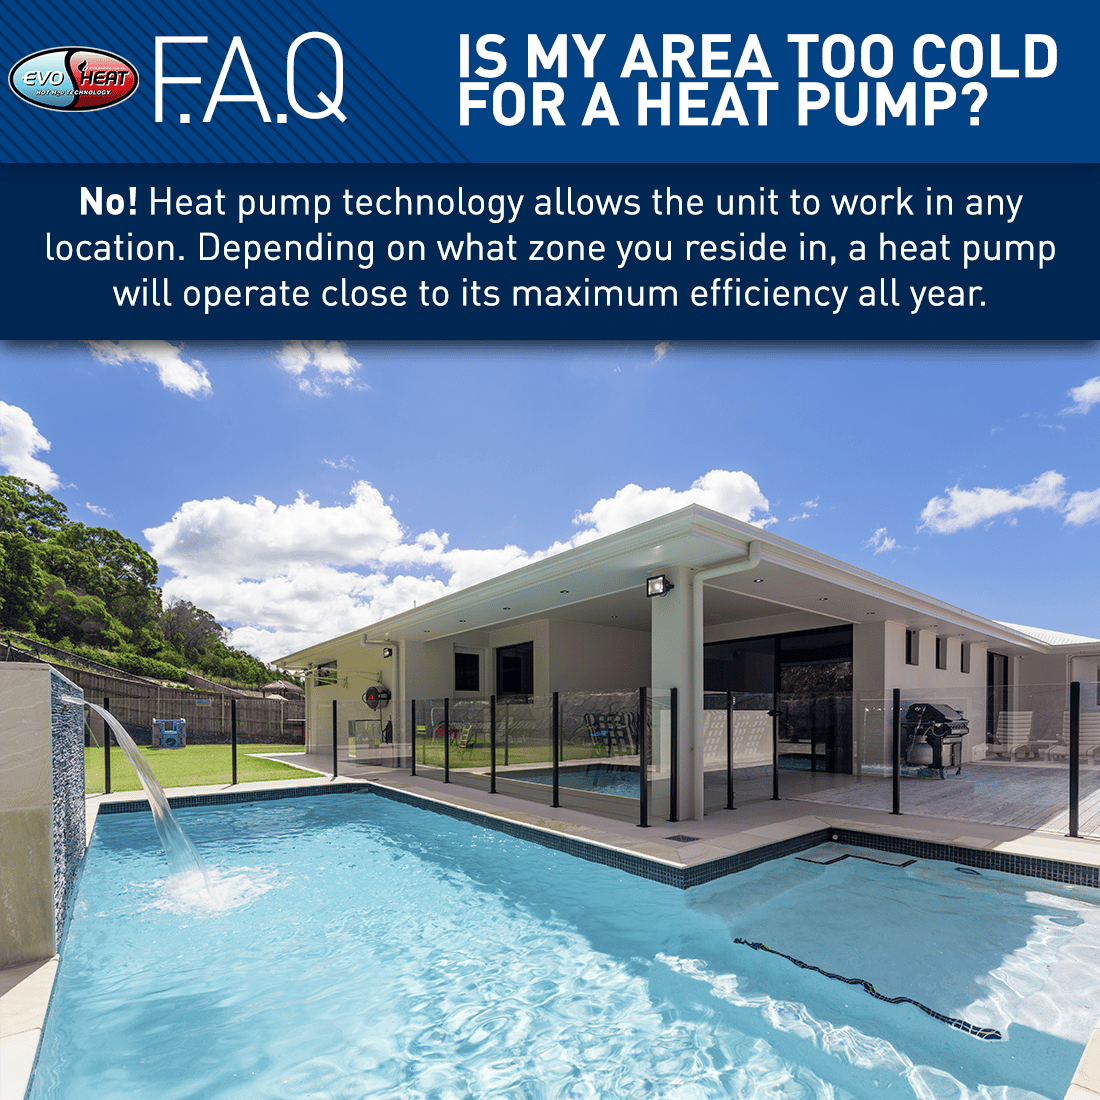 FAQ - Is my area too cold